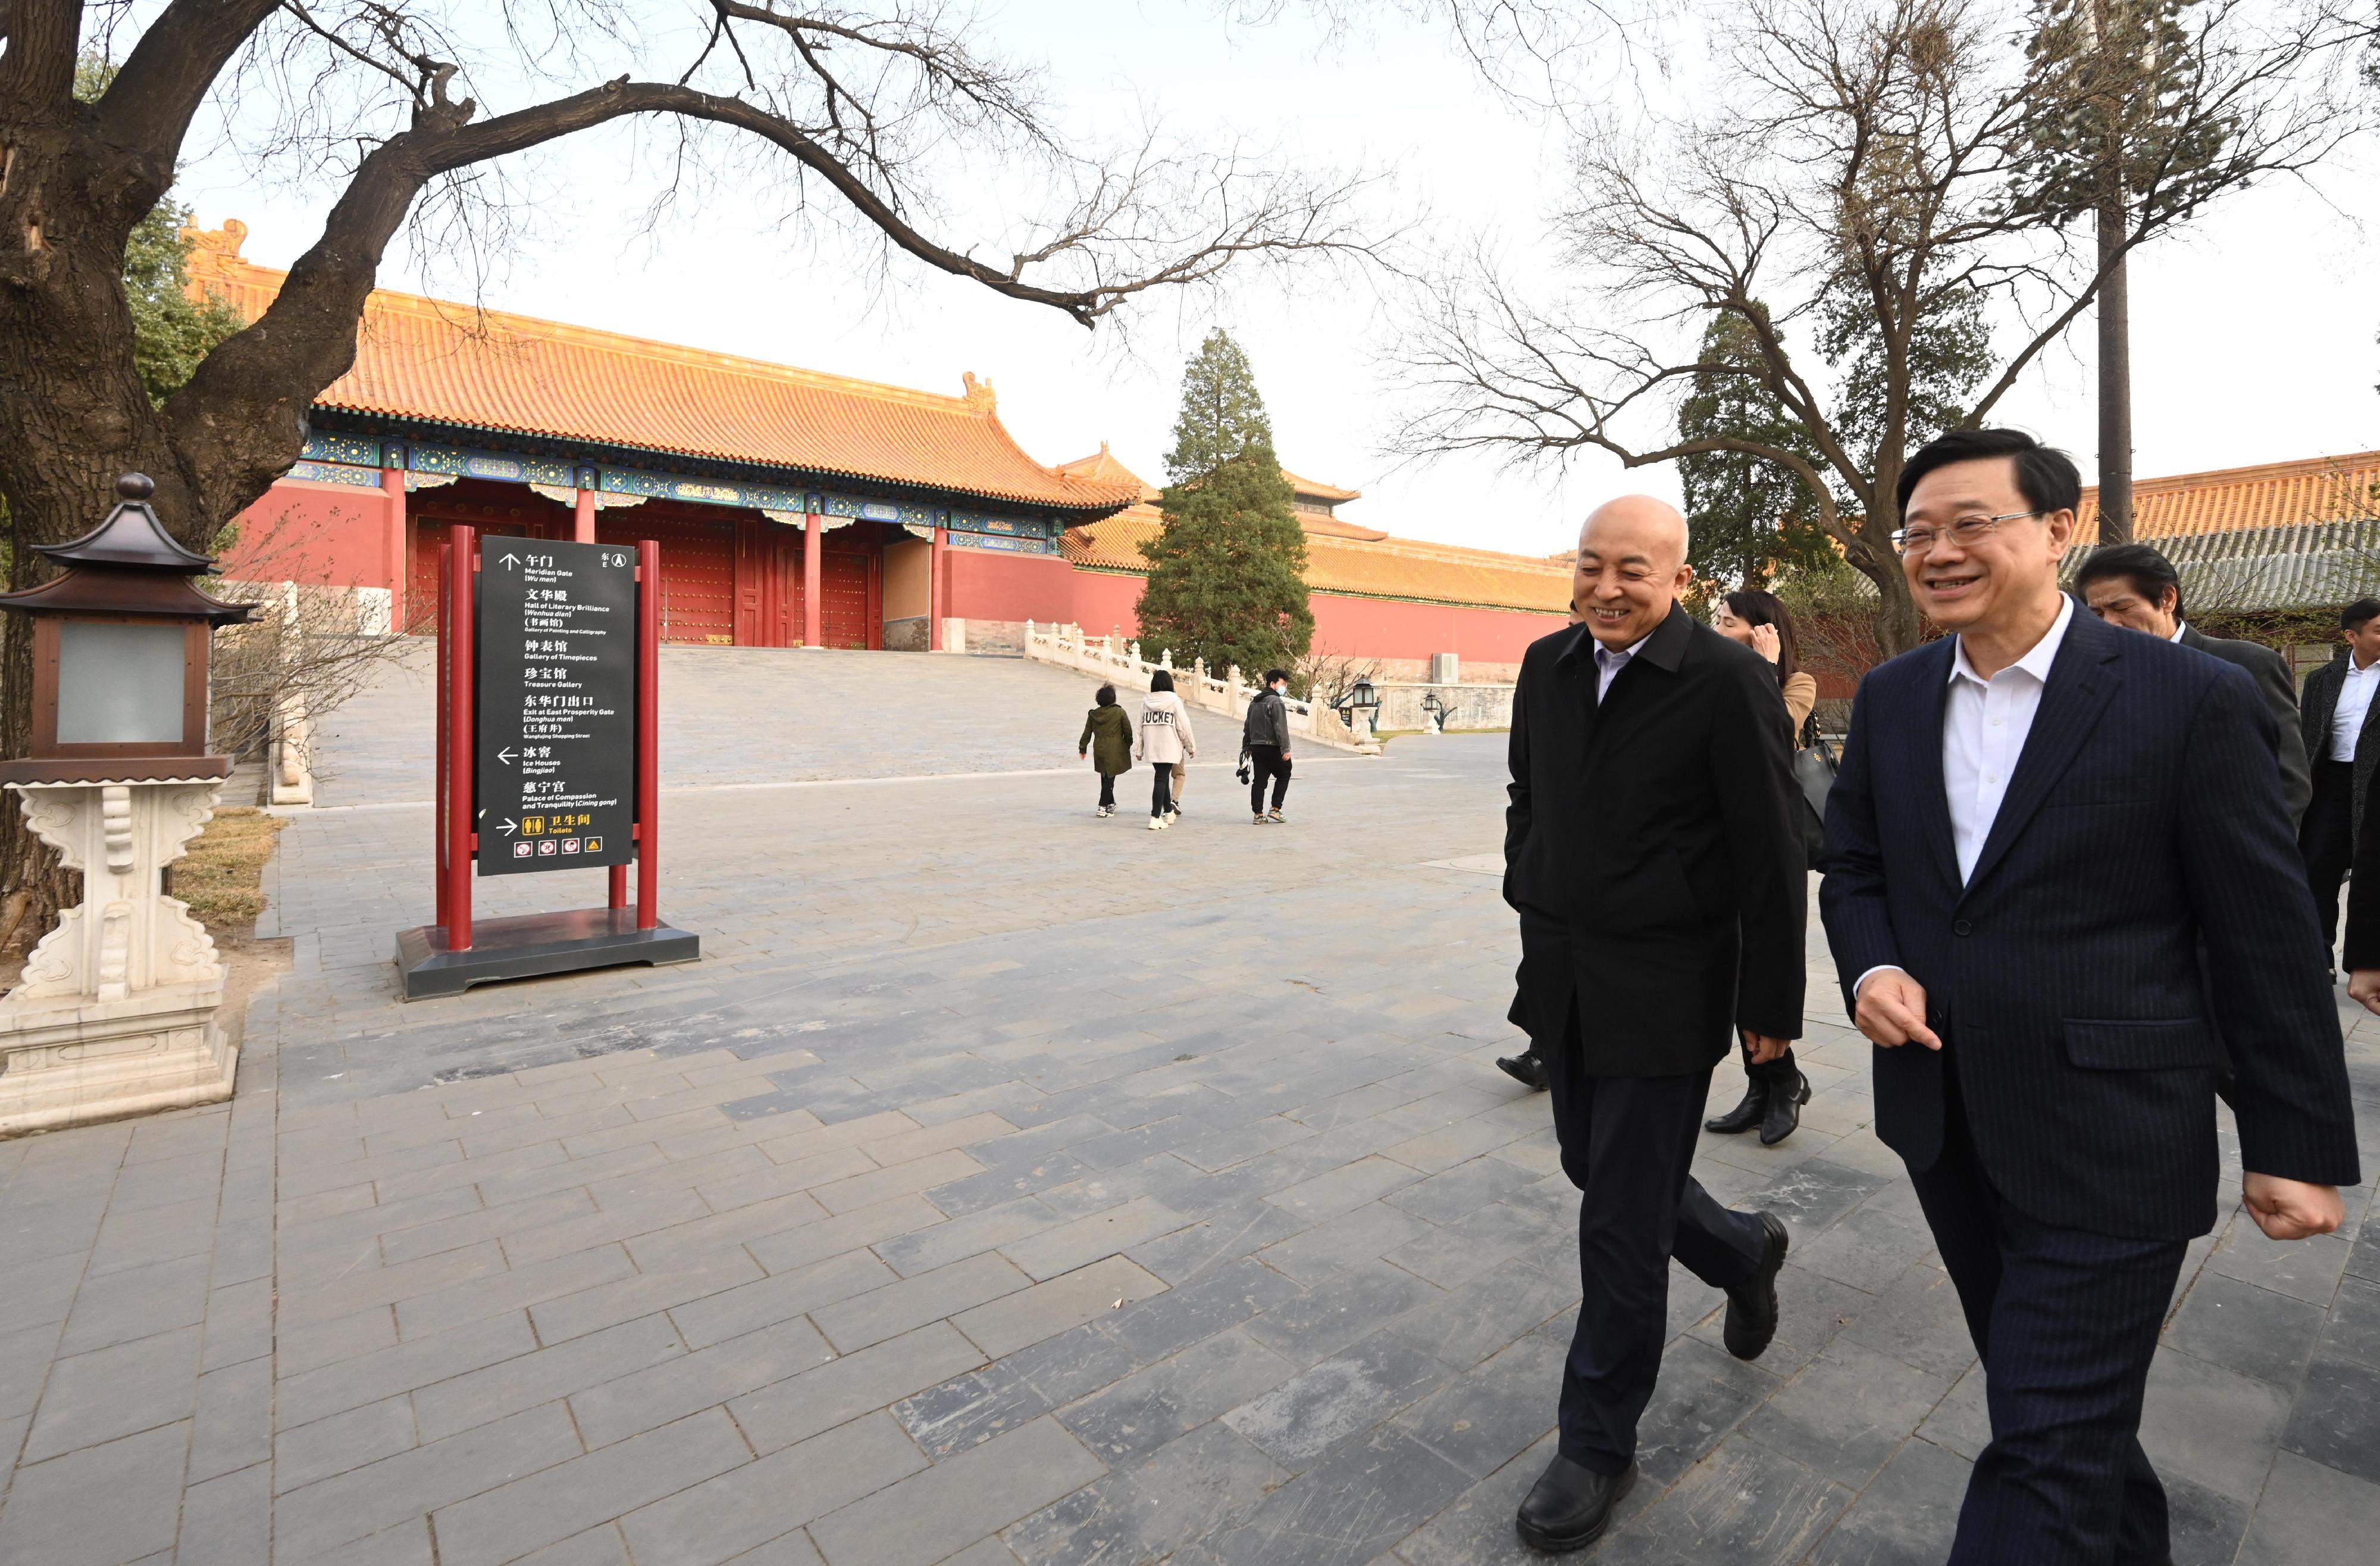 The Chief Executive, Mr John Lee, visited the Palace Museum in Beijing this afternoon (March 14). Photo shows Mr Lee (right) and the Director of the Palace Museum, Dr Wang Xudong (left).